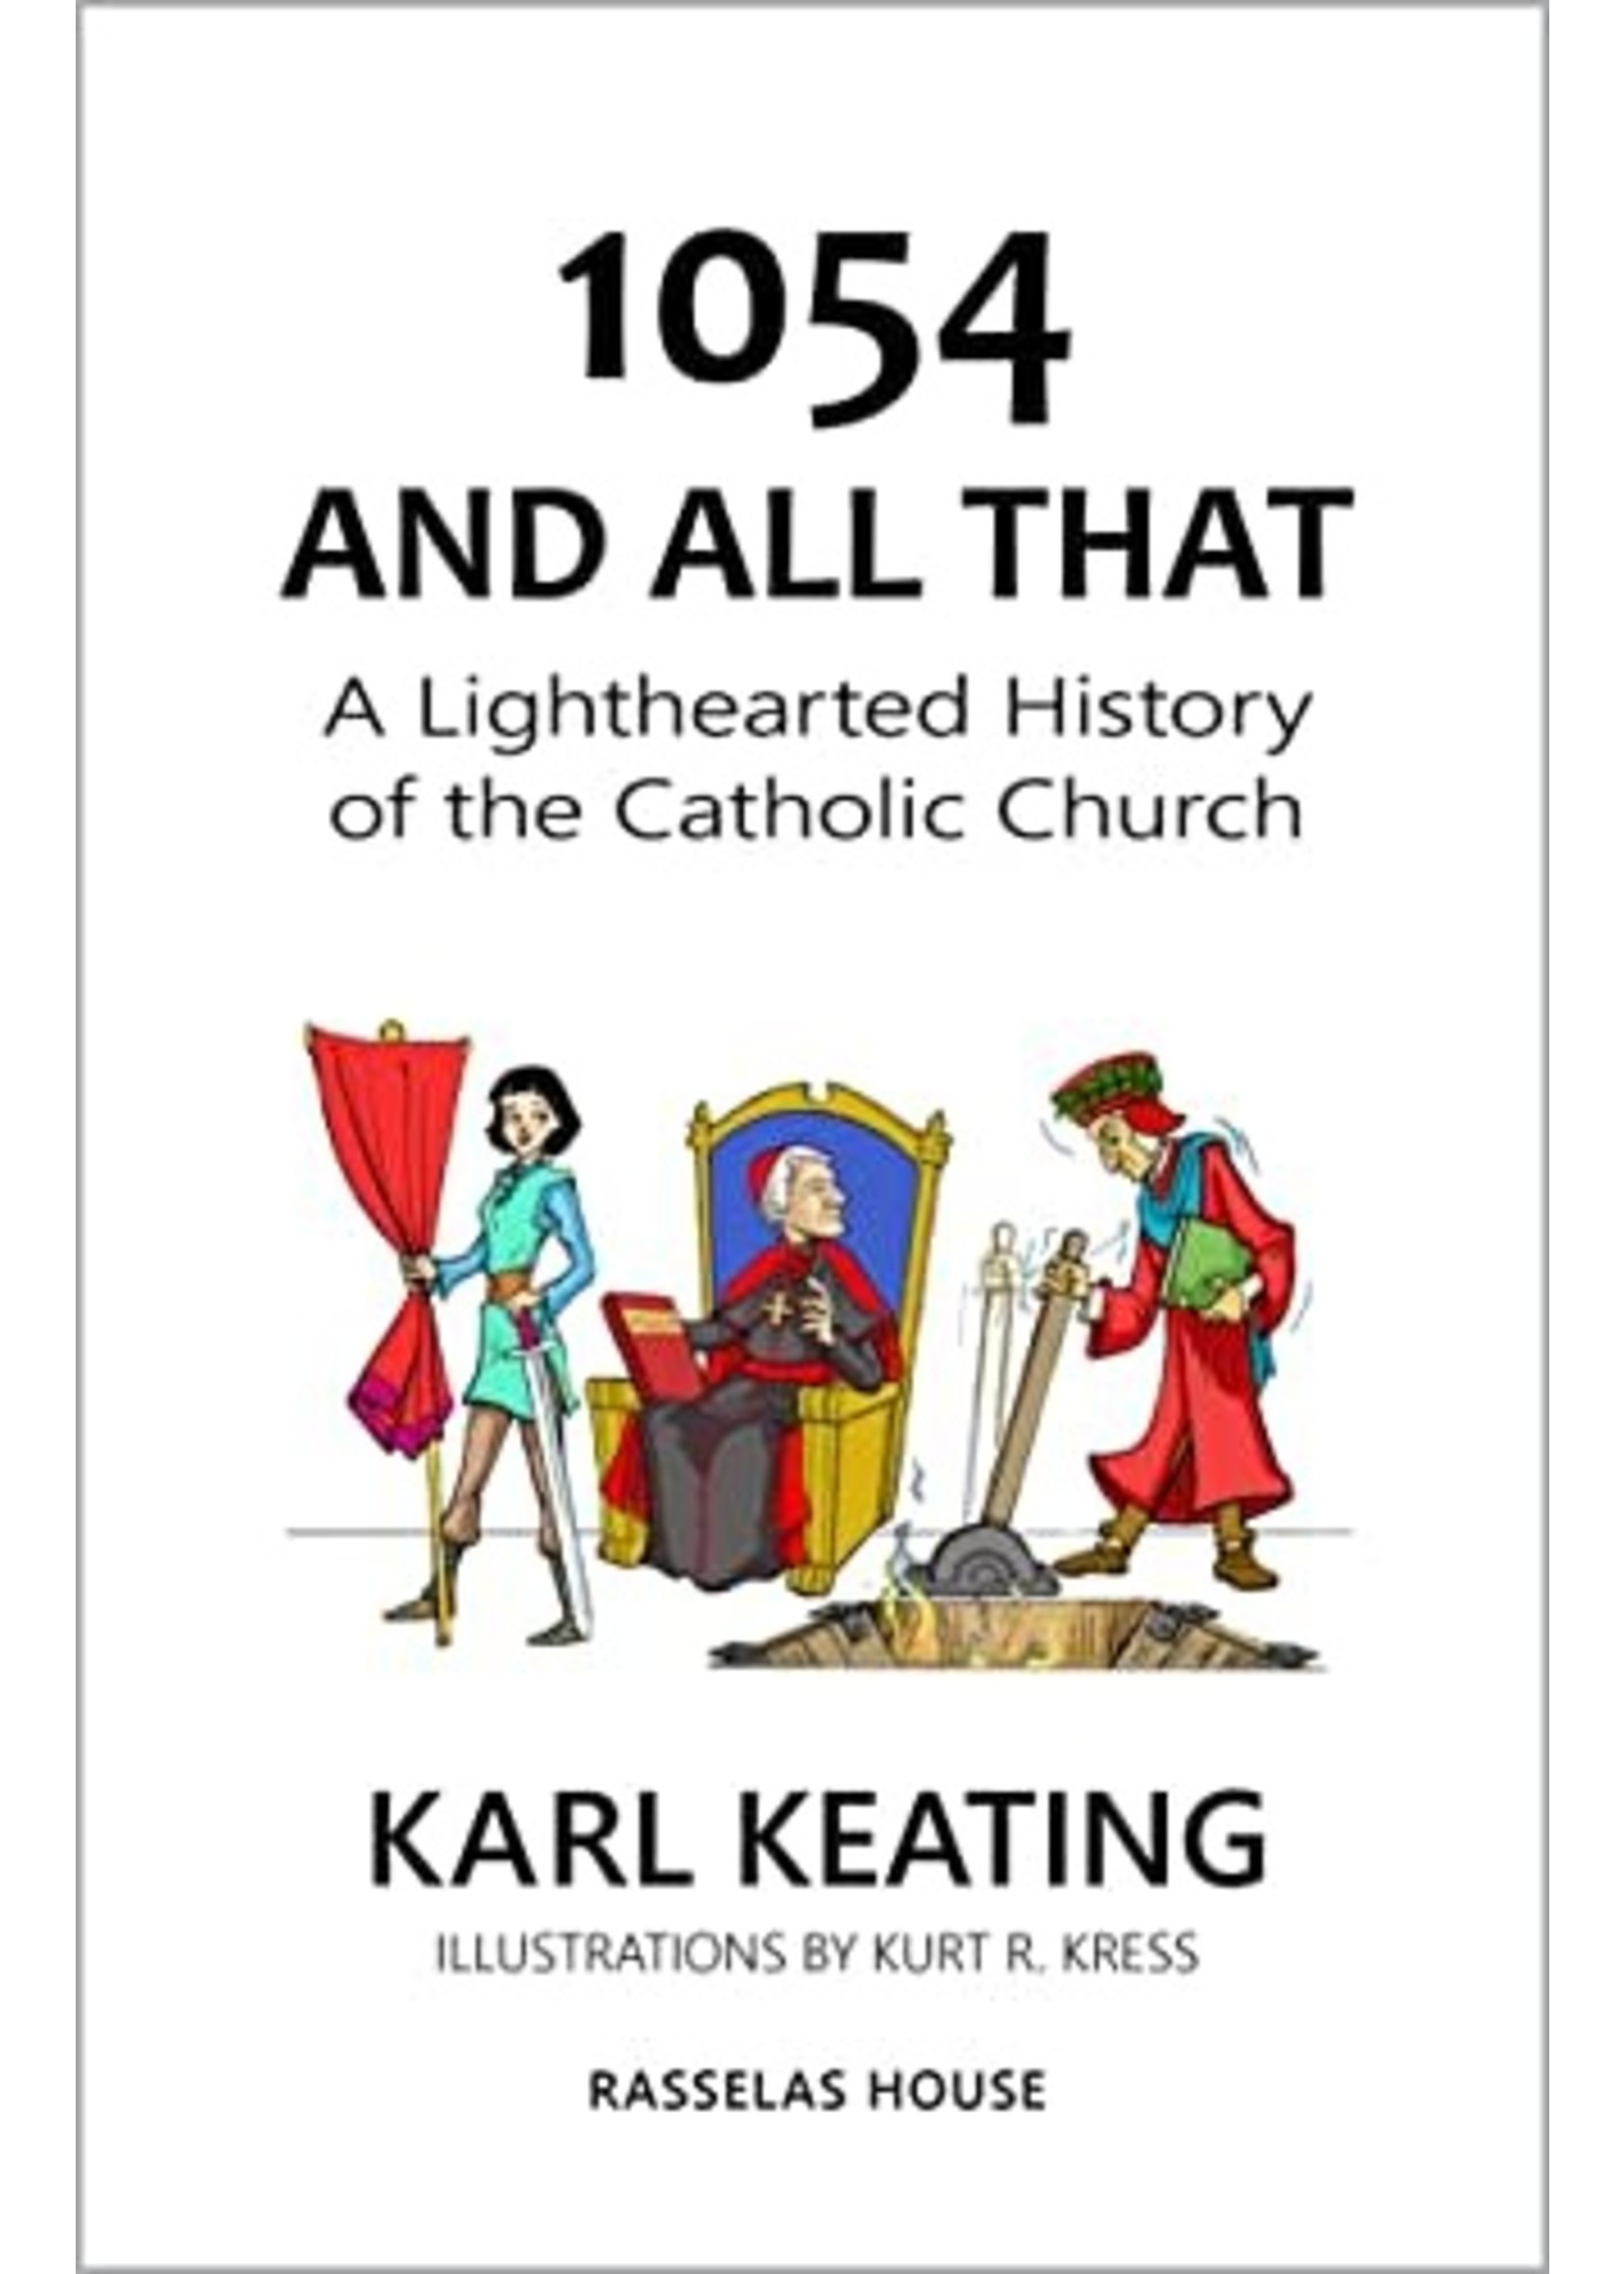 1054 and All That: A Lighthearted History of the Catholic Church